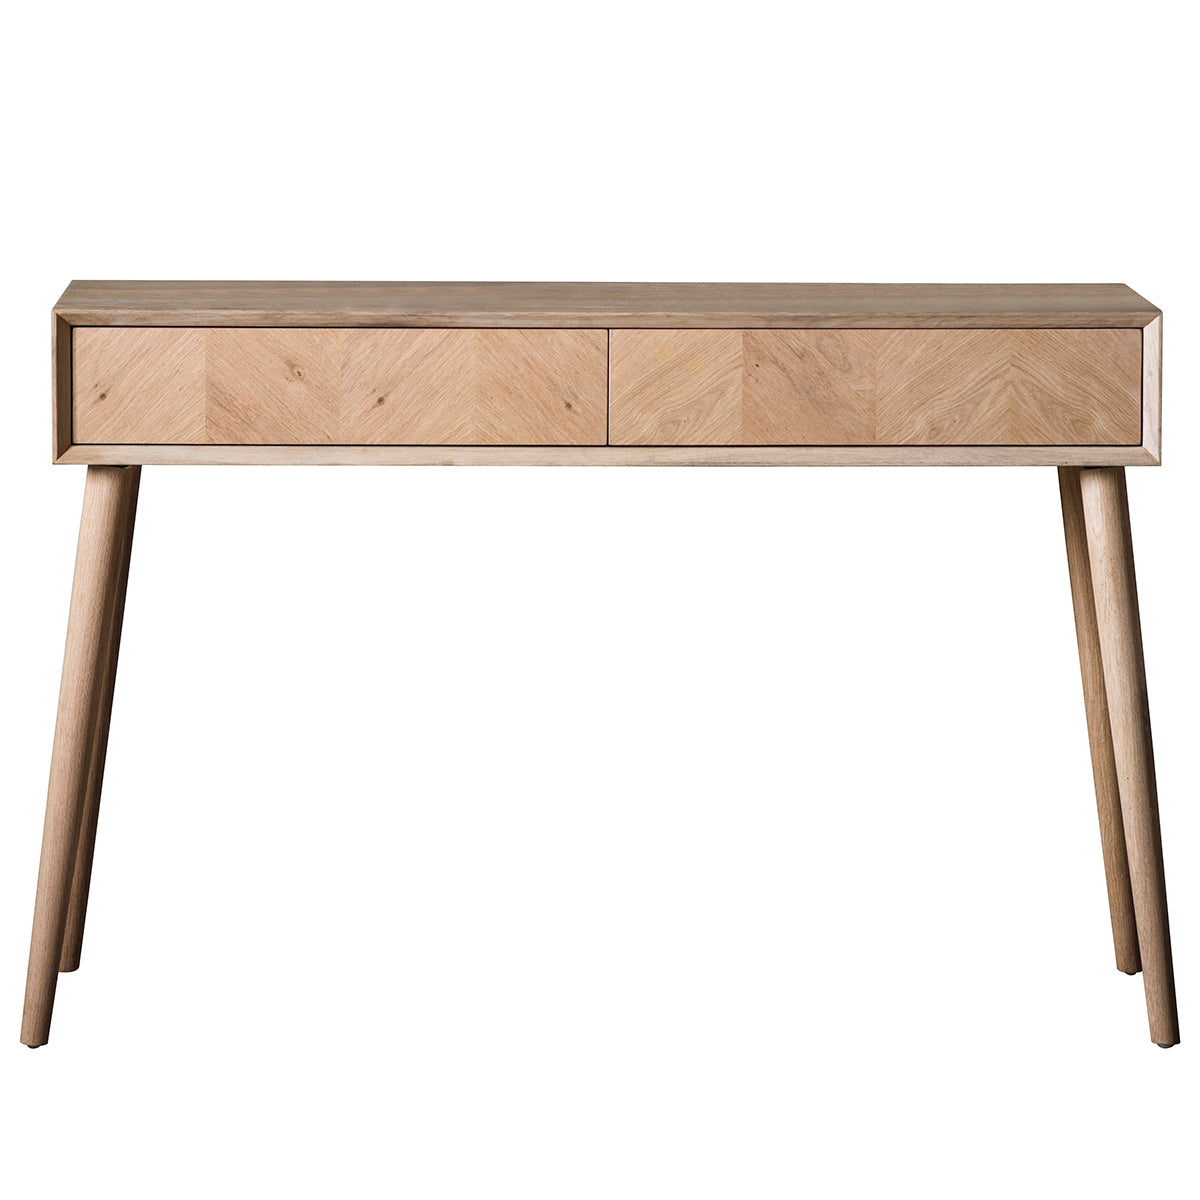 A 2 Drawer Console Table by Kikiathome.co.uk for home furniture and interior decor.